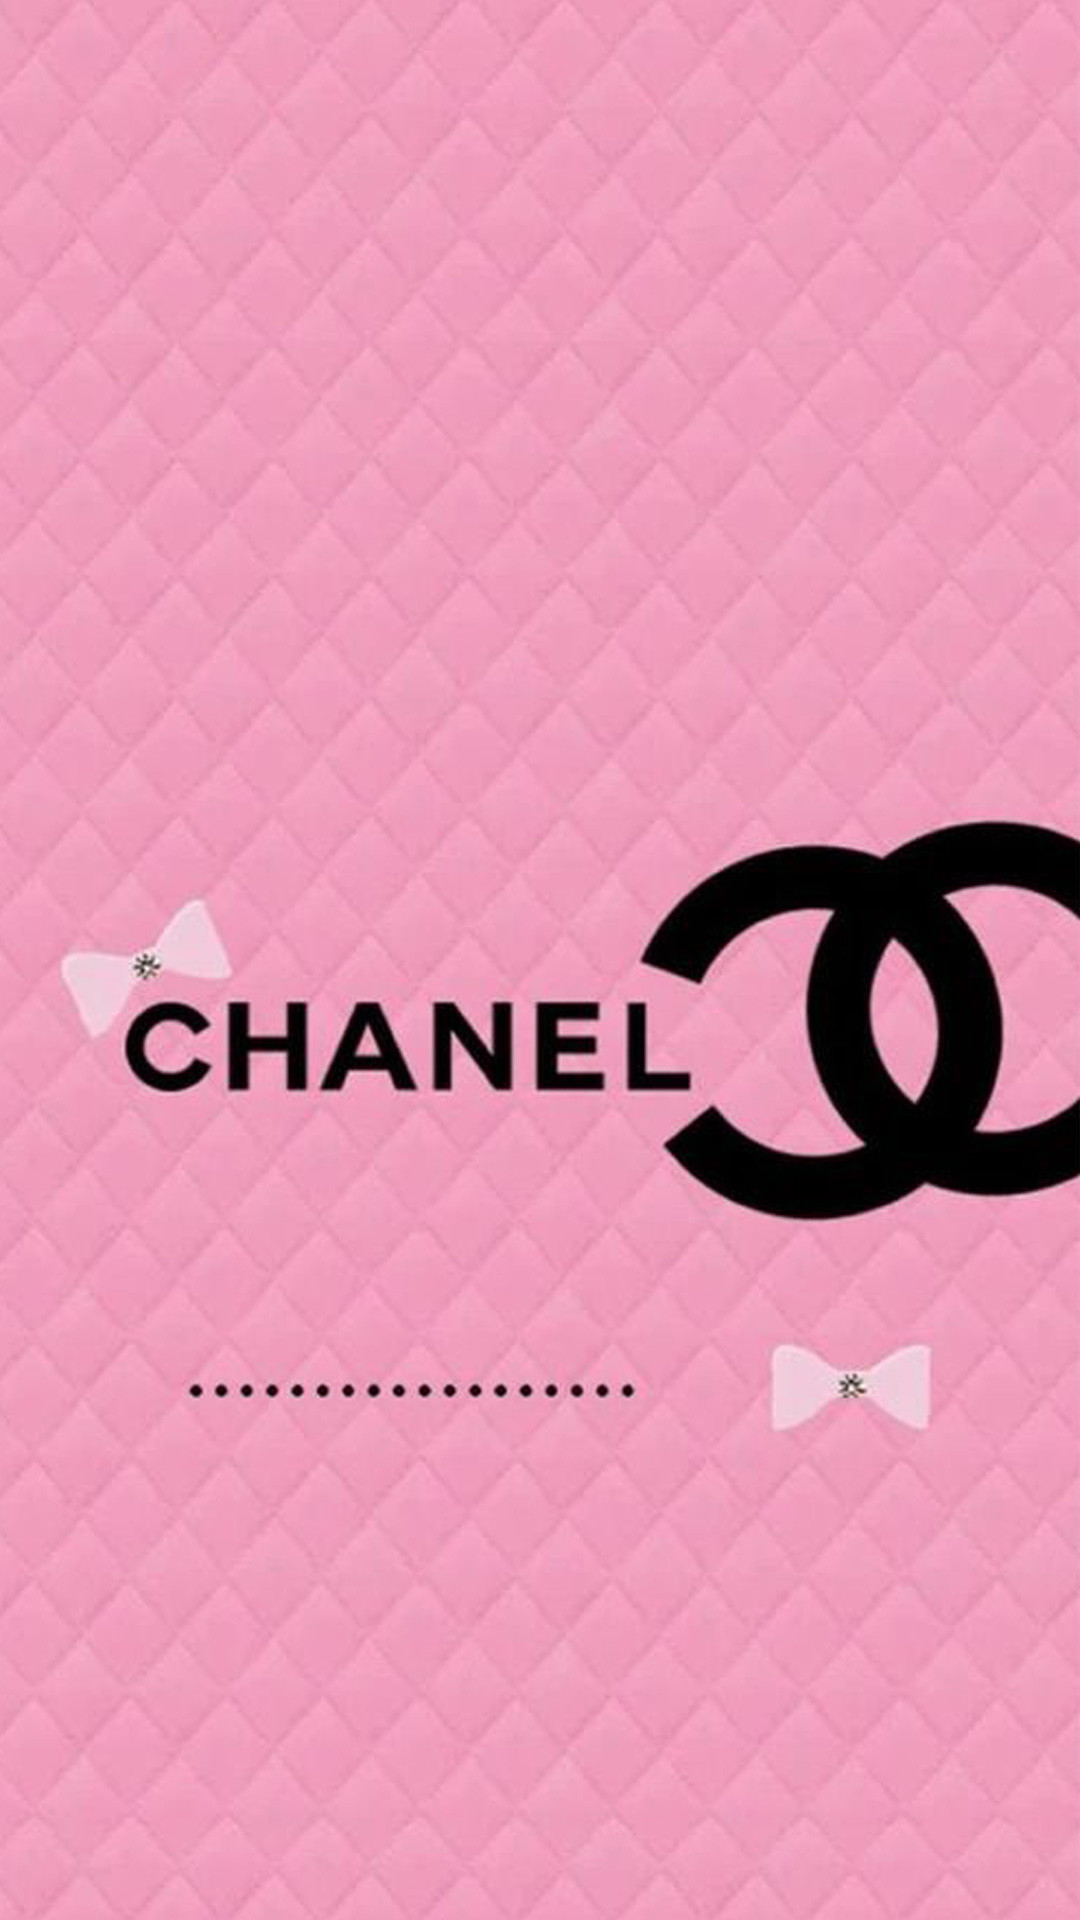 Wiki Hd Chanel Images Iphone Pic Wpc007232 
 Data Src - Chanel - HD Wallpaper 